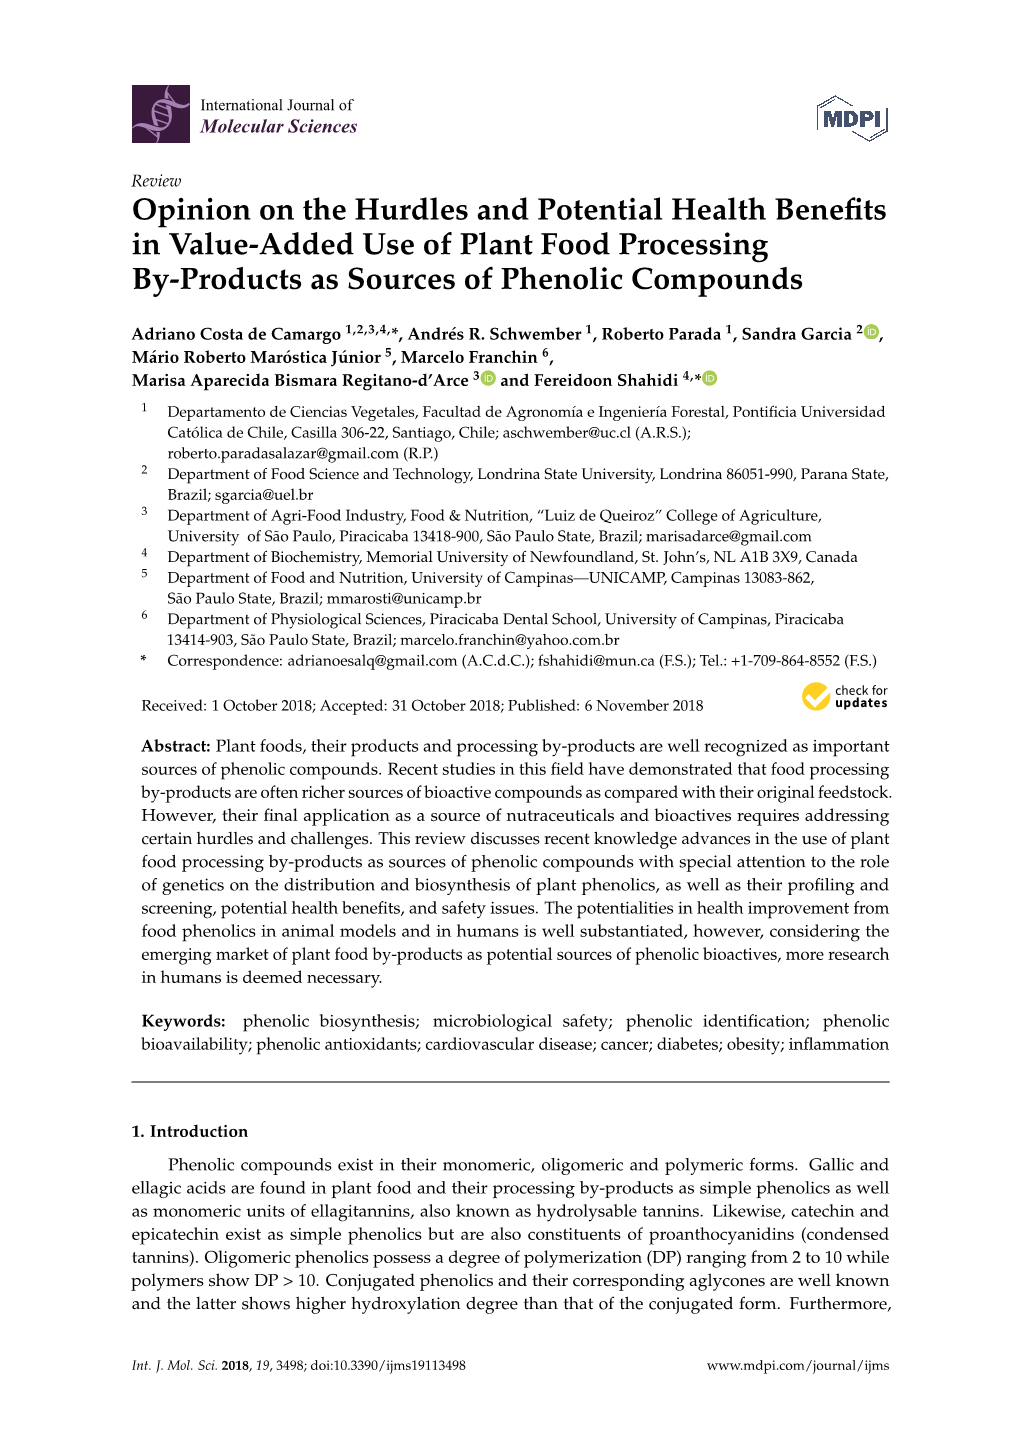 Opinion on the Hurdles and Potential Health Benefits in Value-Added Use of Plant Food Processing By-Products As Sources of Pheno